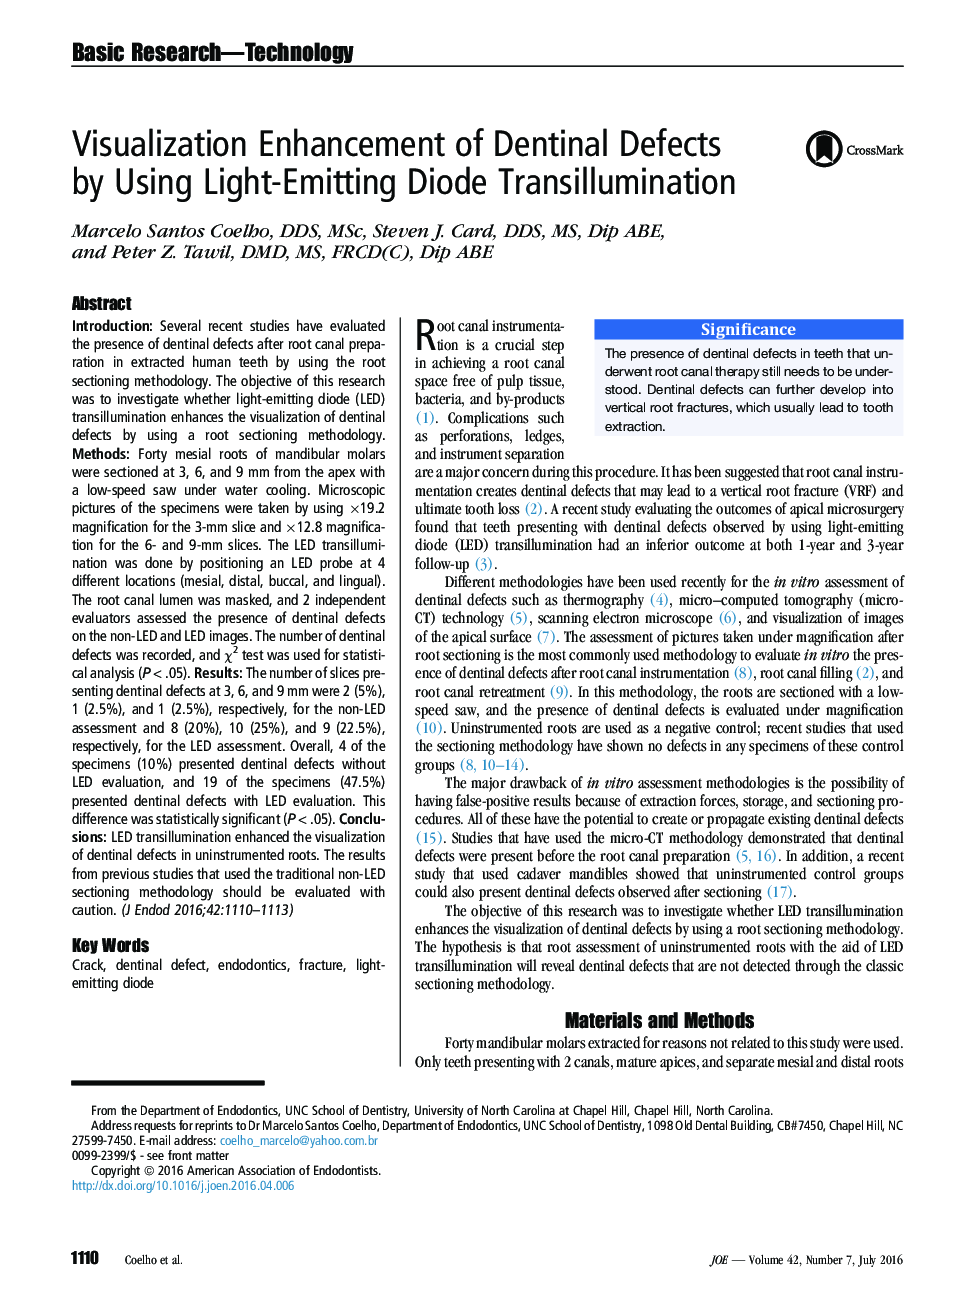 Visualization Enhancement of Dentinal Defects by Using Light-Emitting Diode Transillumination